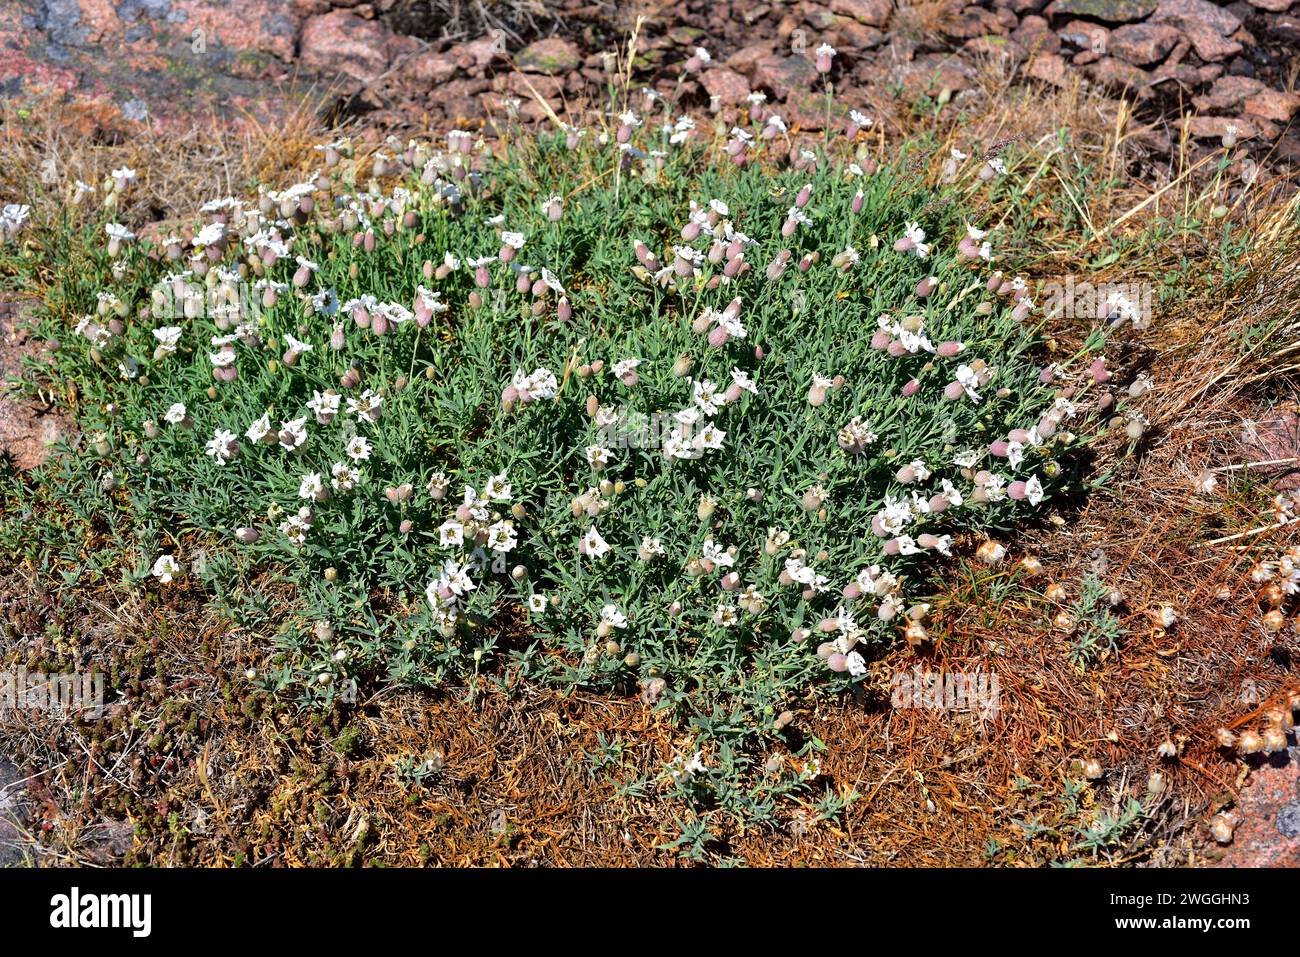 Sea campion (Silene uniflora or Silene maritima) is a prostrate perennial herb native to Atlantic and Baltic coasts. This photo was taken in Bohuslan, Stock Photo